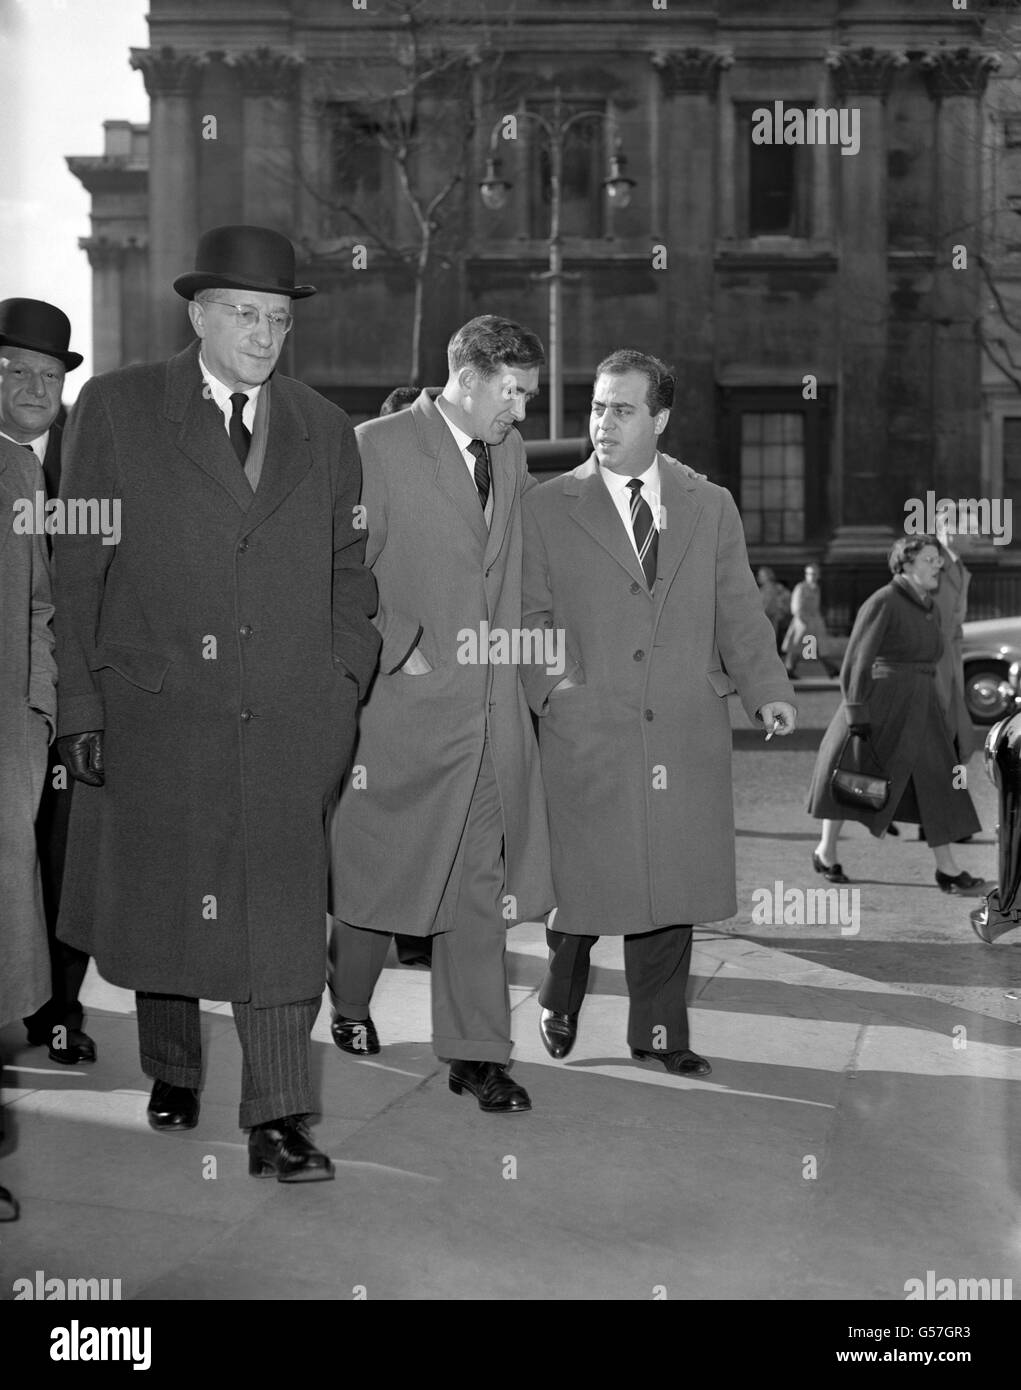 Tottenham Hotspur footballer Danny Blanchflower (c), whose brother Jackie was injured in the Munich plane crash, leaves St. Martin-in-the-Fields with Italian football agent Gigi Peronace (r) and Austrian sports journalist Dr Willy Meisl (l). Flight 609 which was carrying Manchester United players and officials as well as other passengers crashed on its third attempt to take off from a slush-covered runway at Munich-Riem Airport in Munich, resulting in a total of 23 fatalities with 21 survivors. Stock Photo